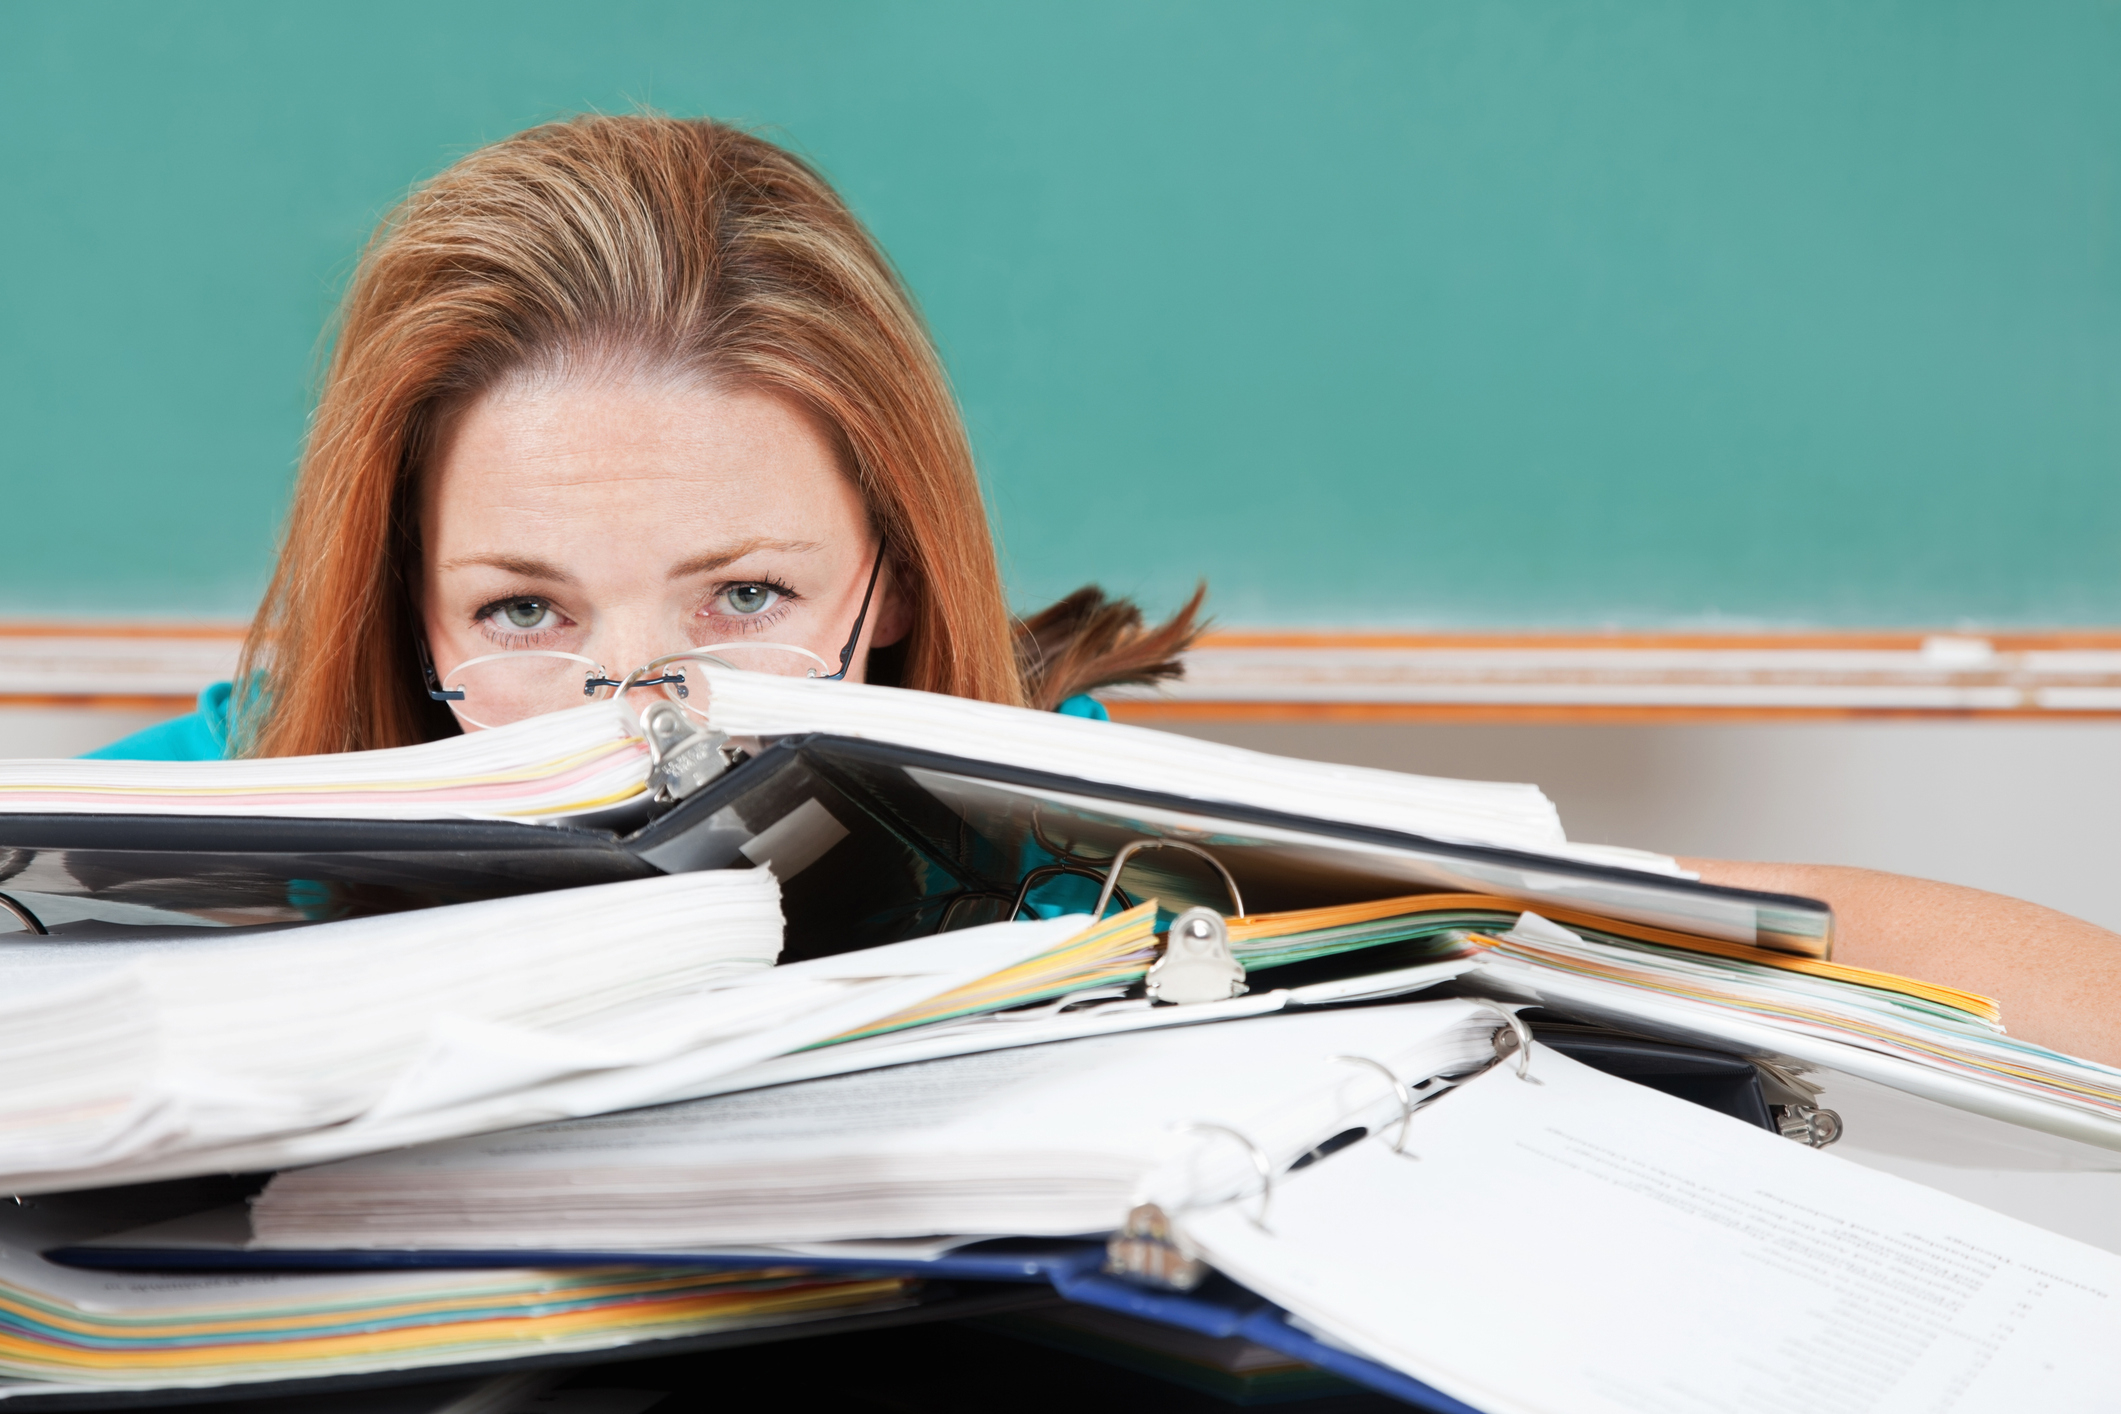 A woman, partially hidden behind several open binders and stacks of papers on a desk, appears overwhelmed